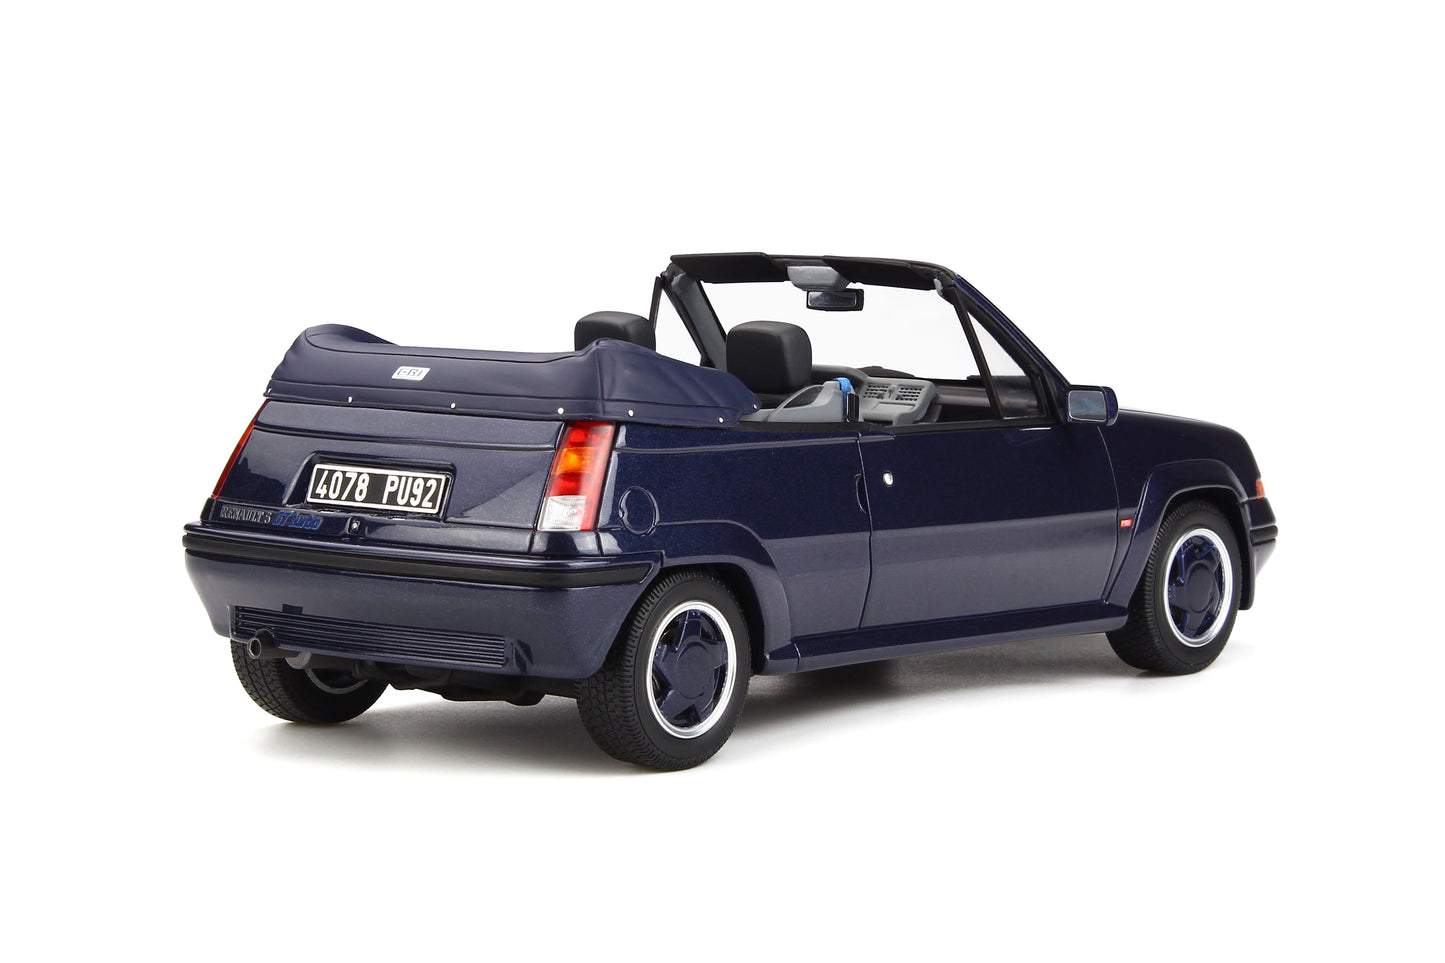 OTTO 1:18 Renault 5 GT Turbo Cabriolet by EBS 1990 OT280